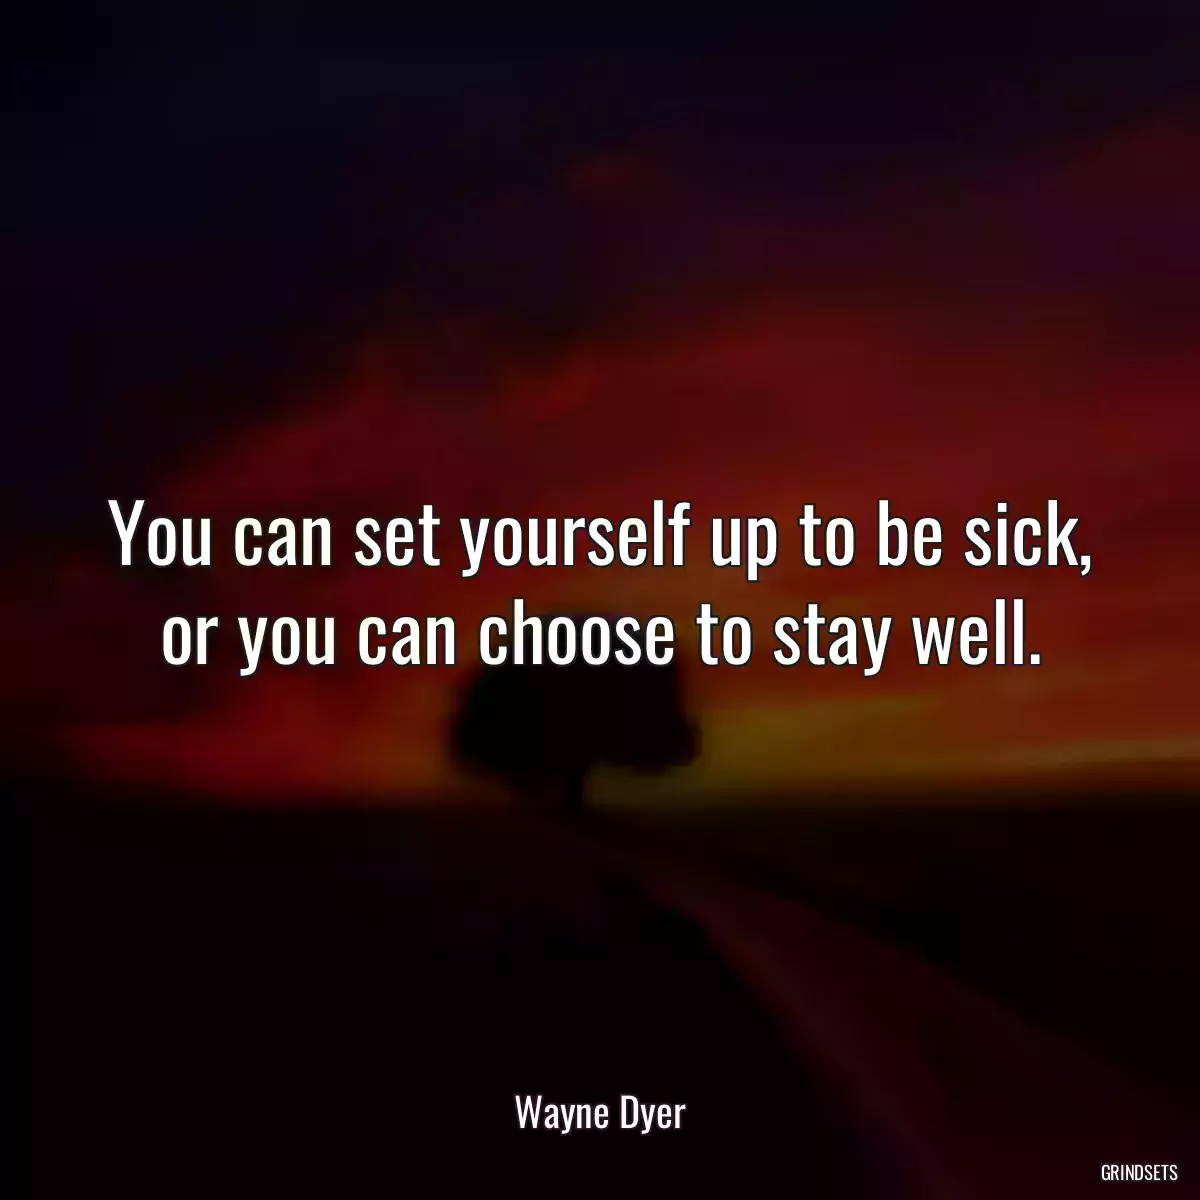 You can set yourself up to be sick, or you can choose to stay well.